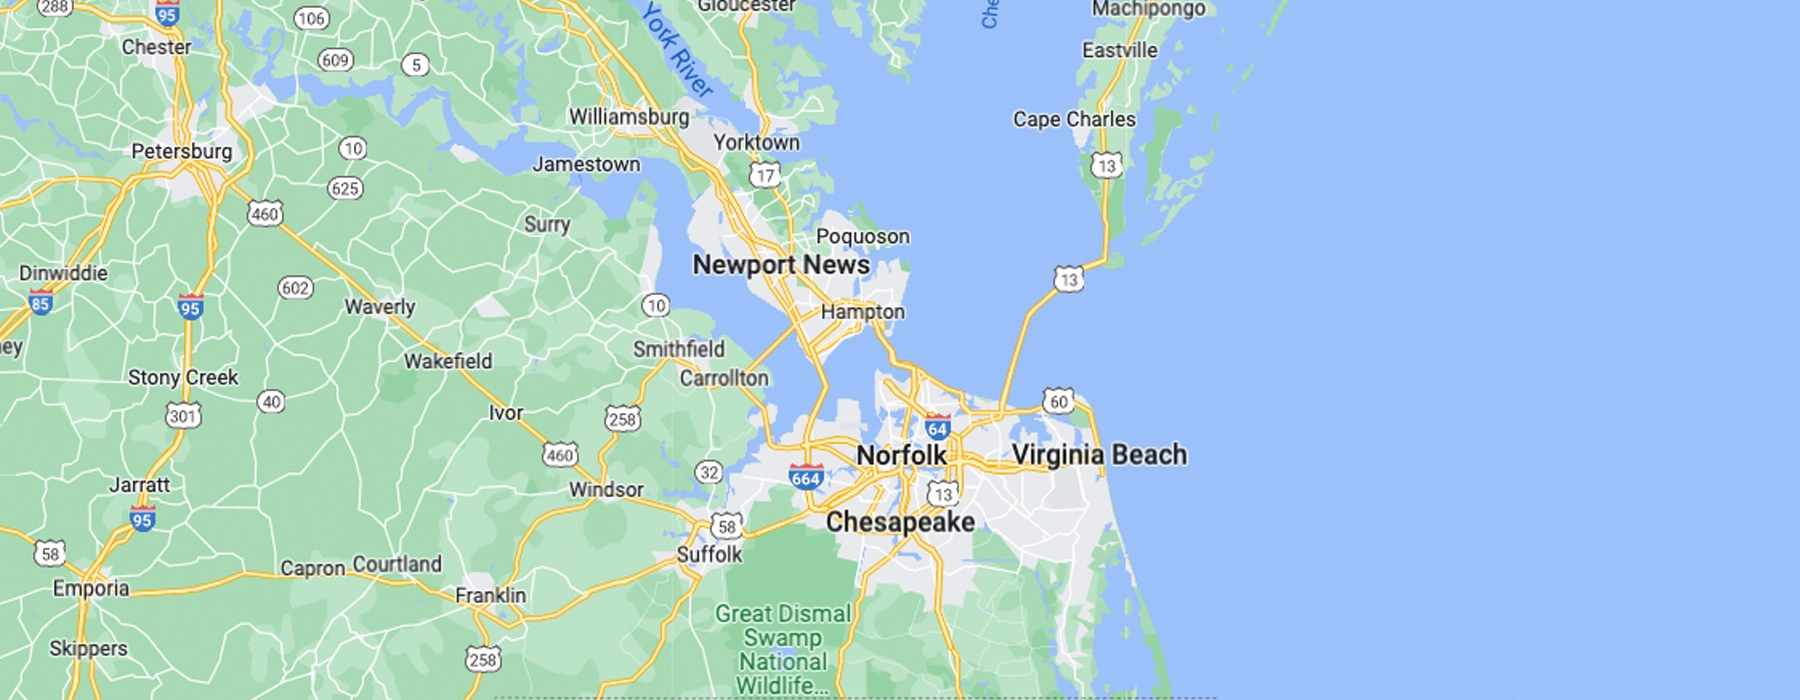 Map showing the entire service area for Mosquito Elite Pest Control in Hampton Roads and north into Williamsburg, Virginia